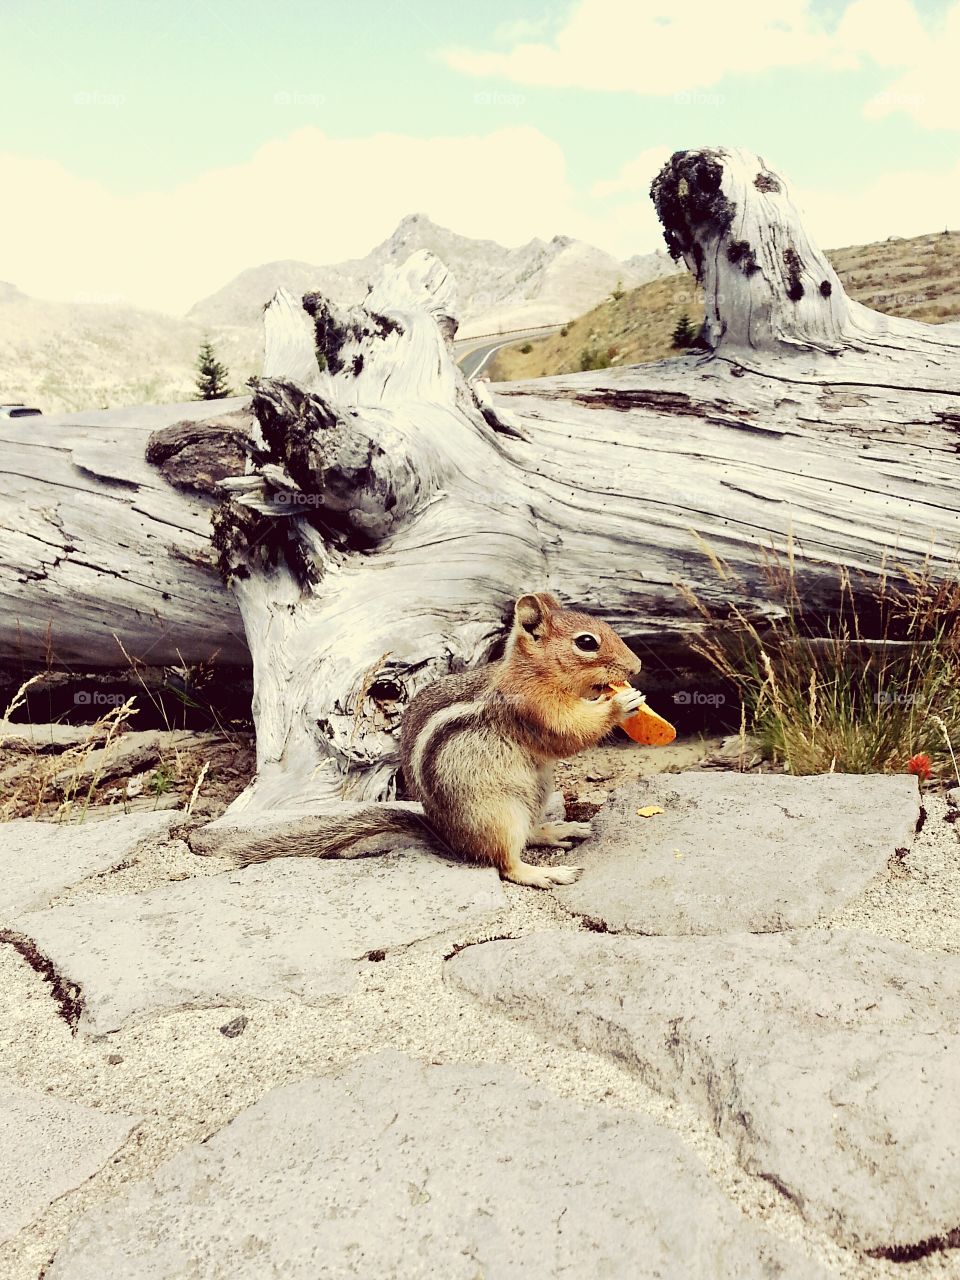 Cheekin'. Got this picture of a chipmunk while on a day trip with a friend.